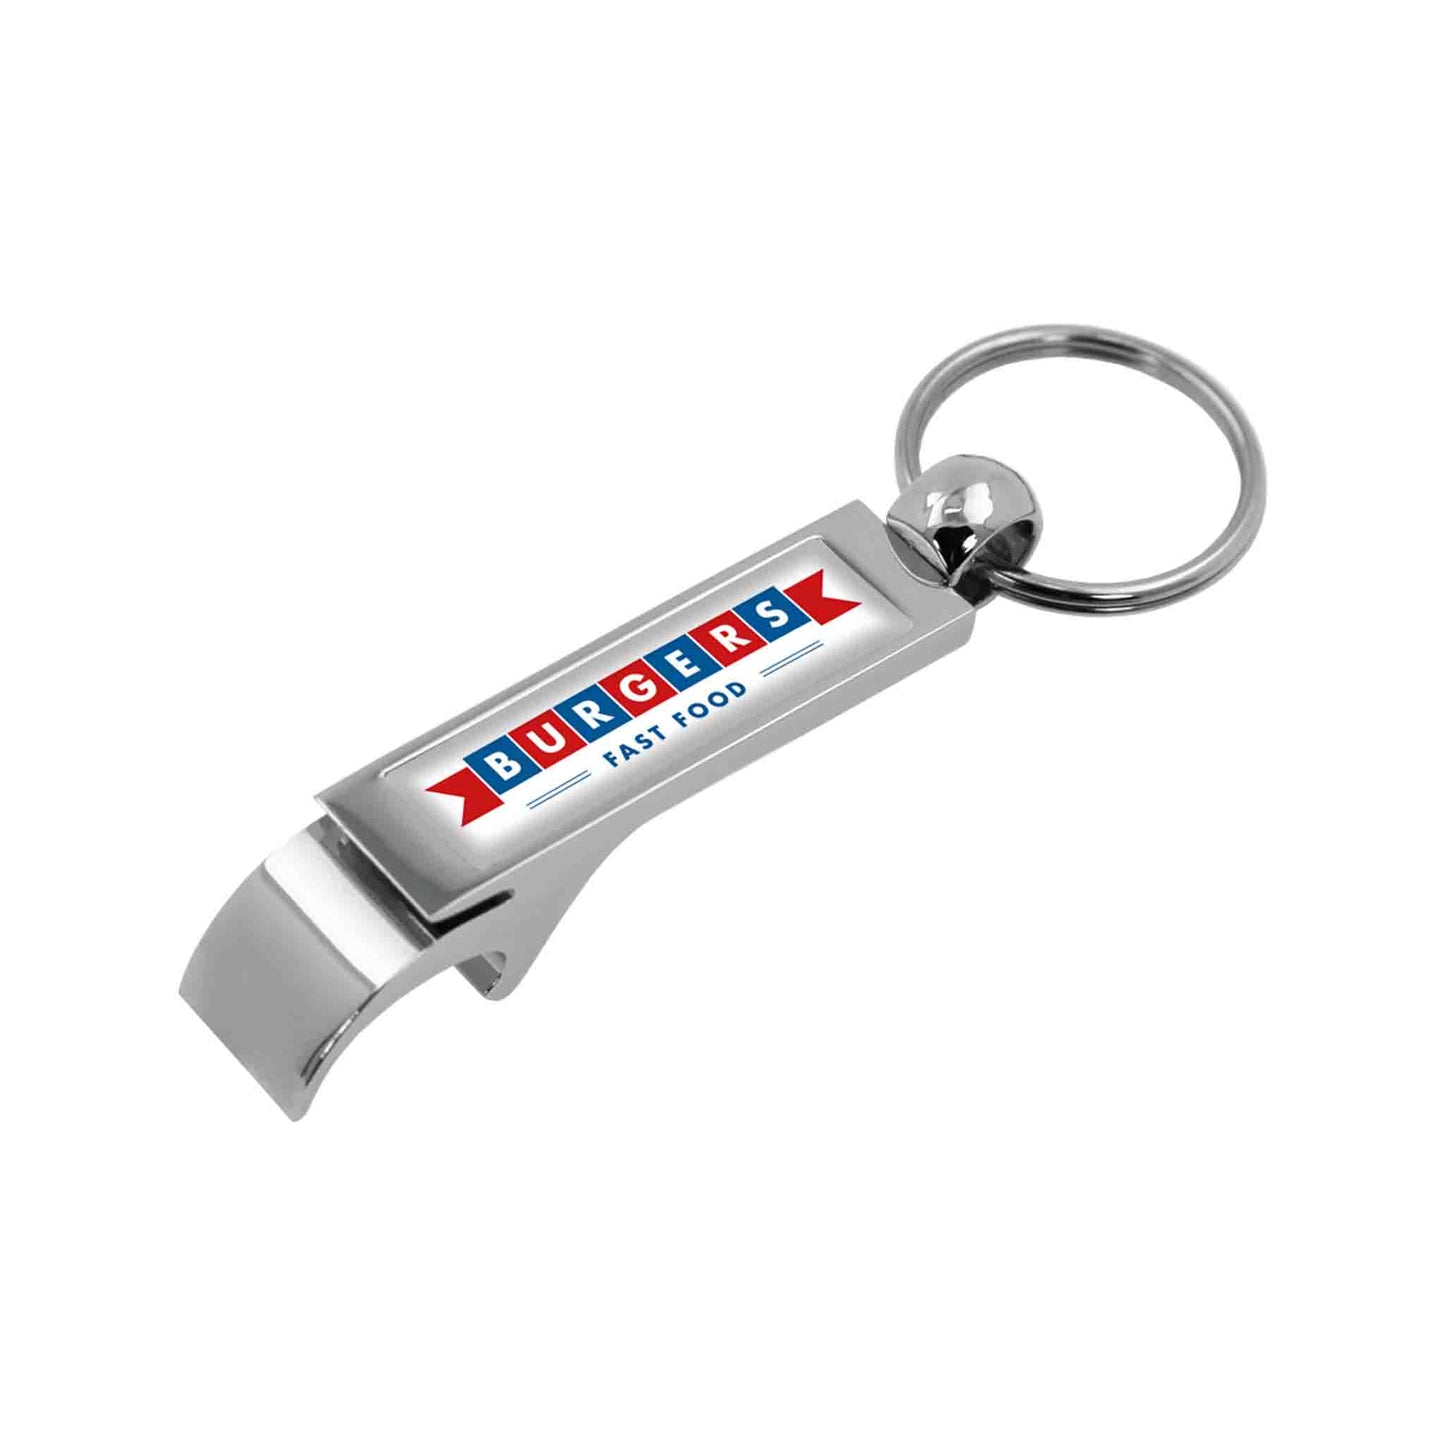 MagBottle "metal" keychain